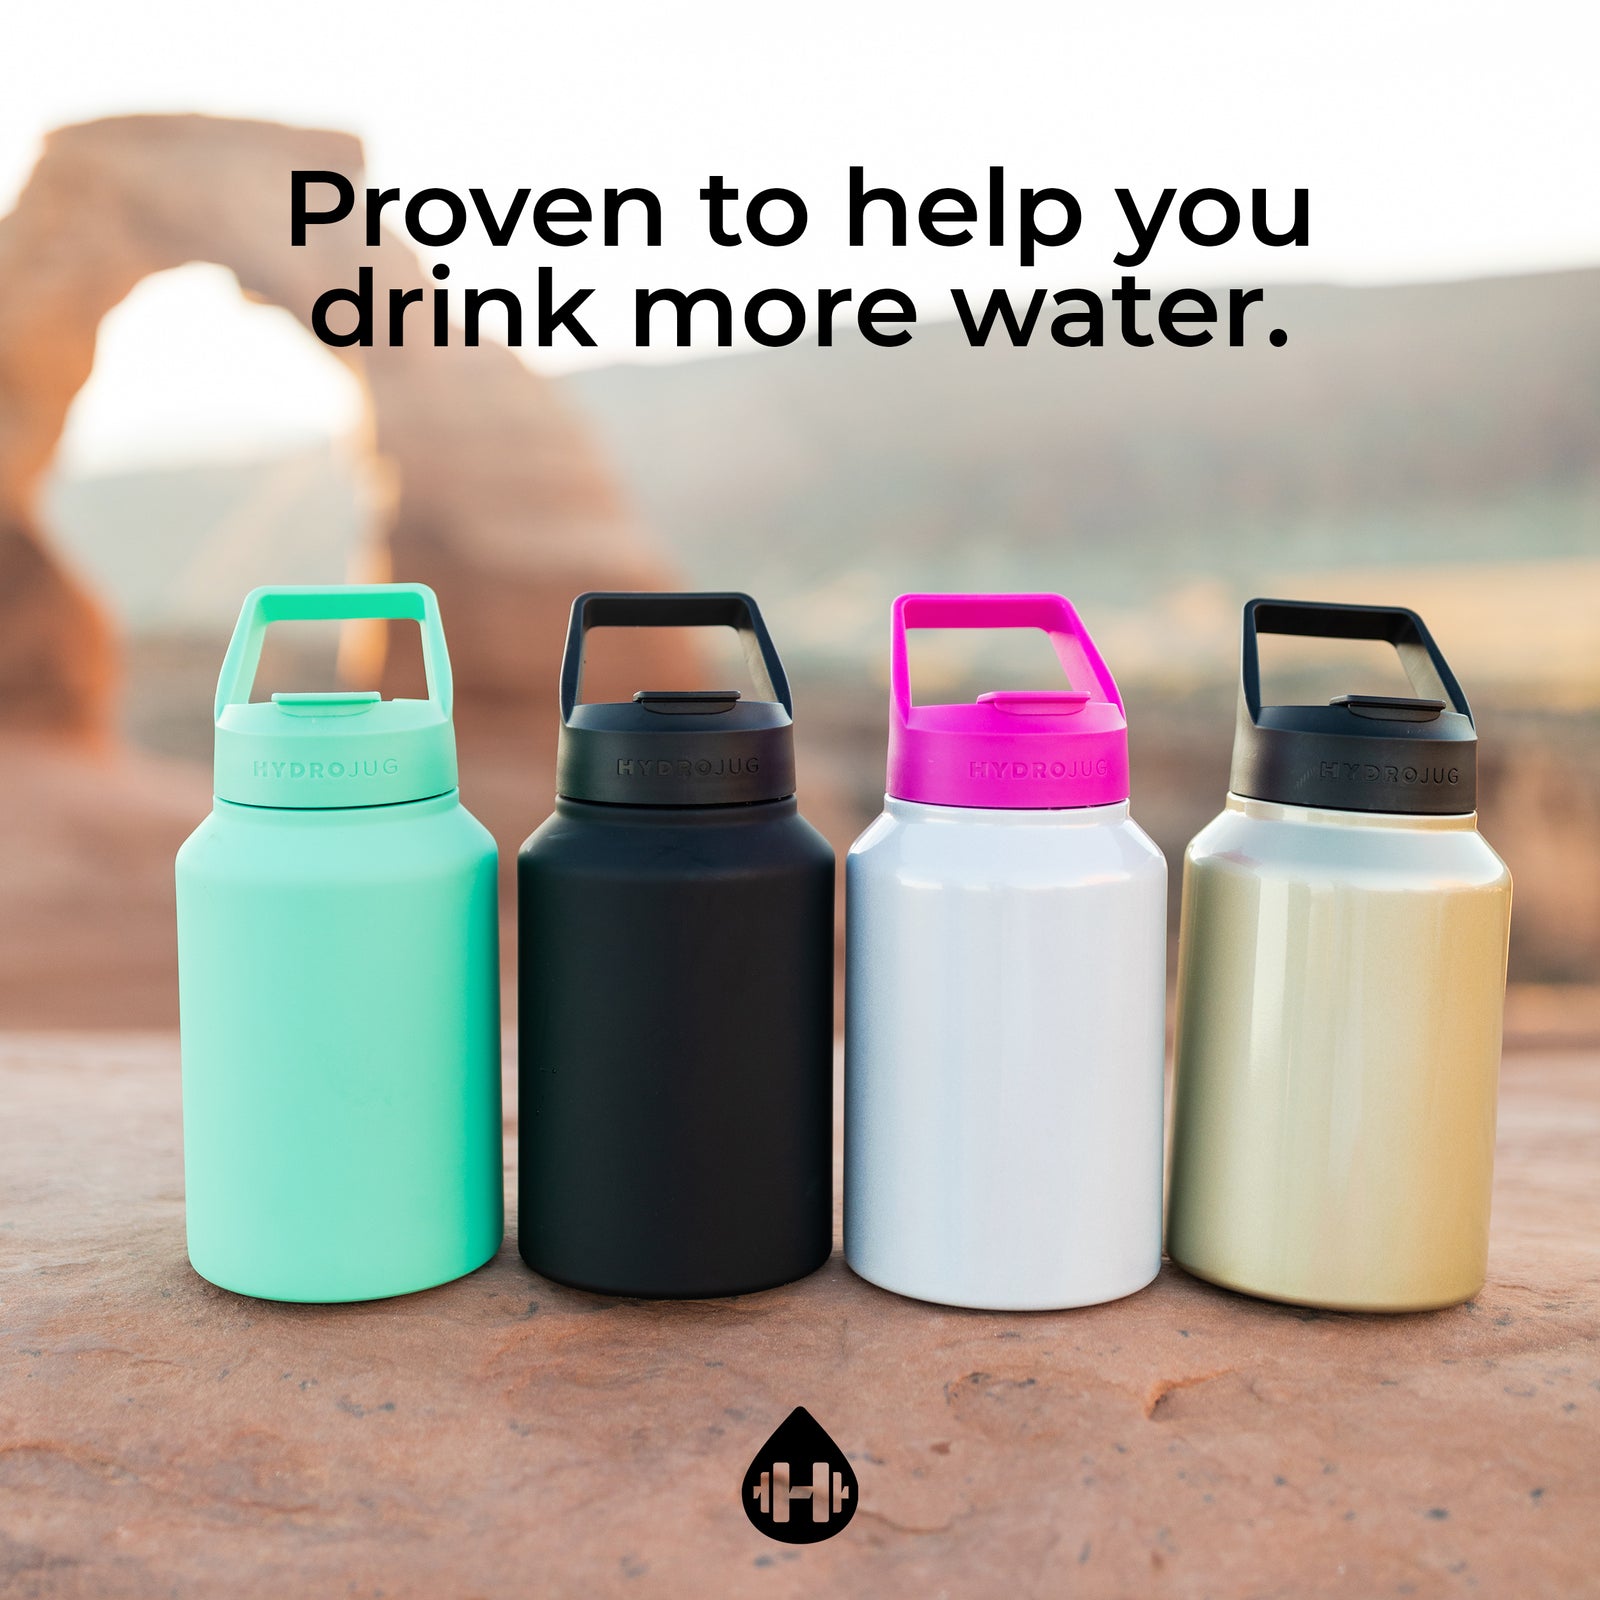 HydroJug - Our HyrdroStraw makes it even easier to drink